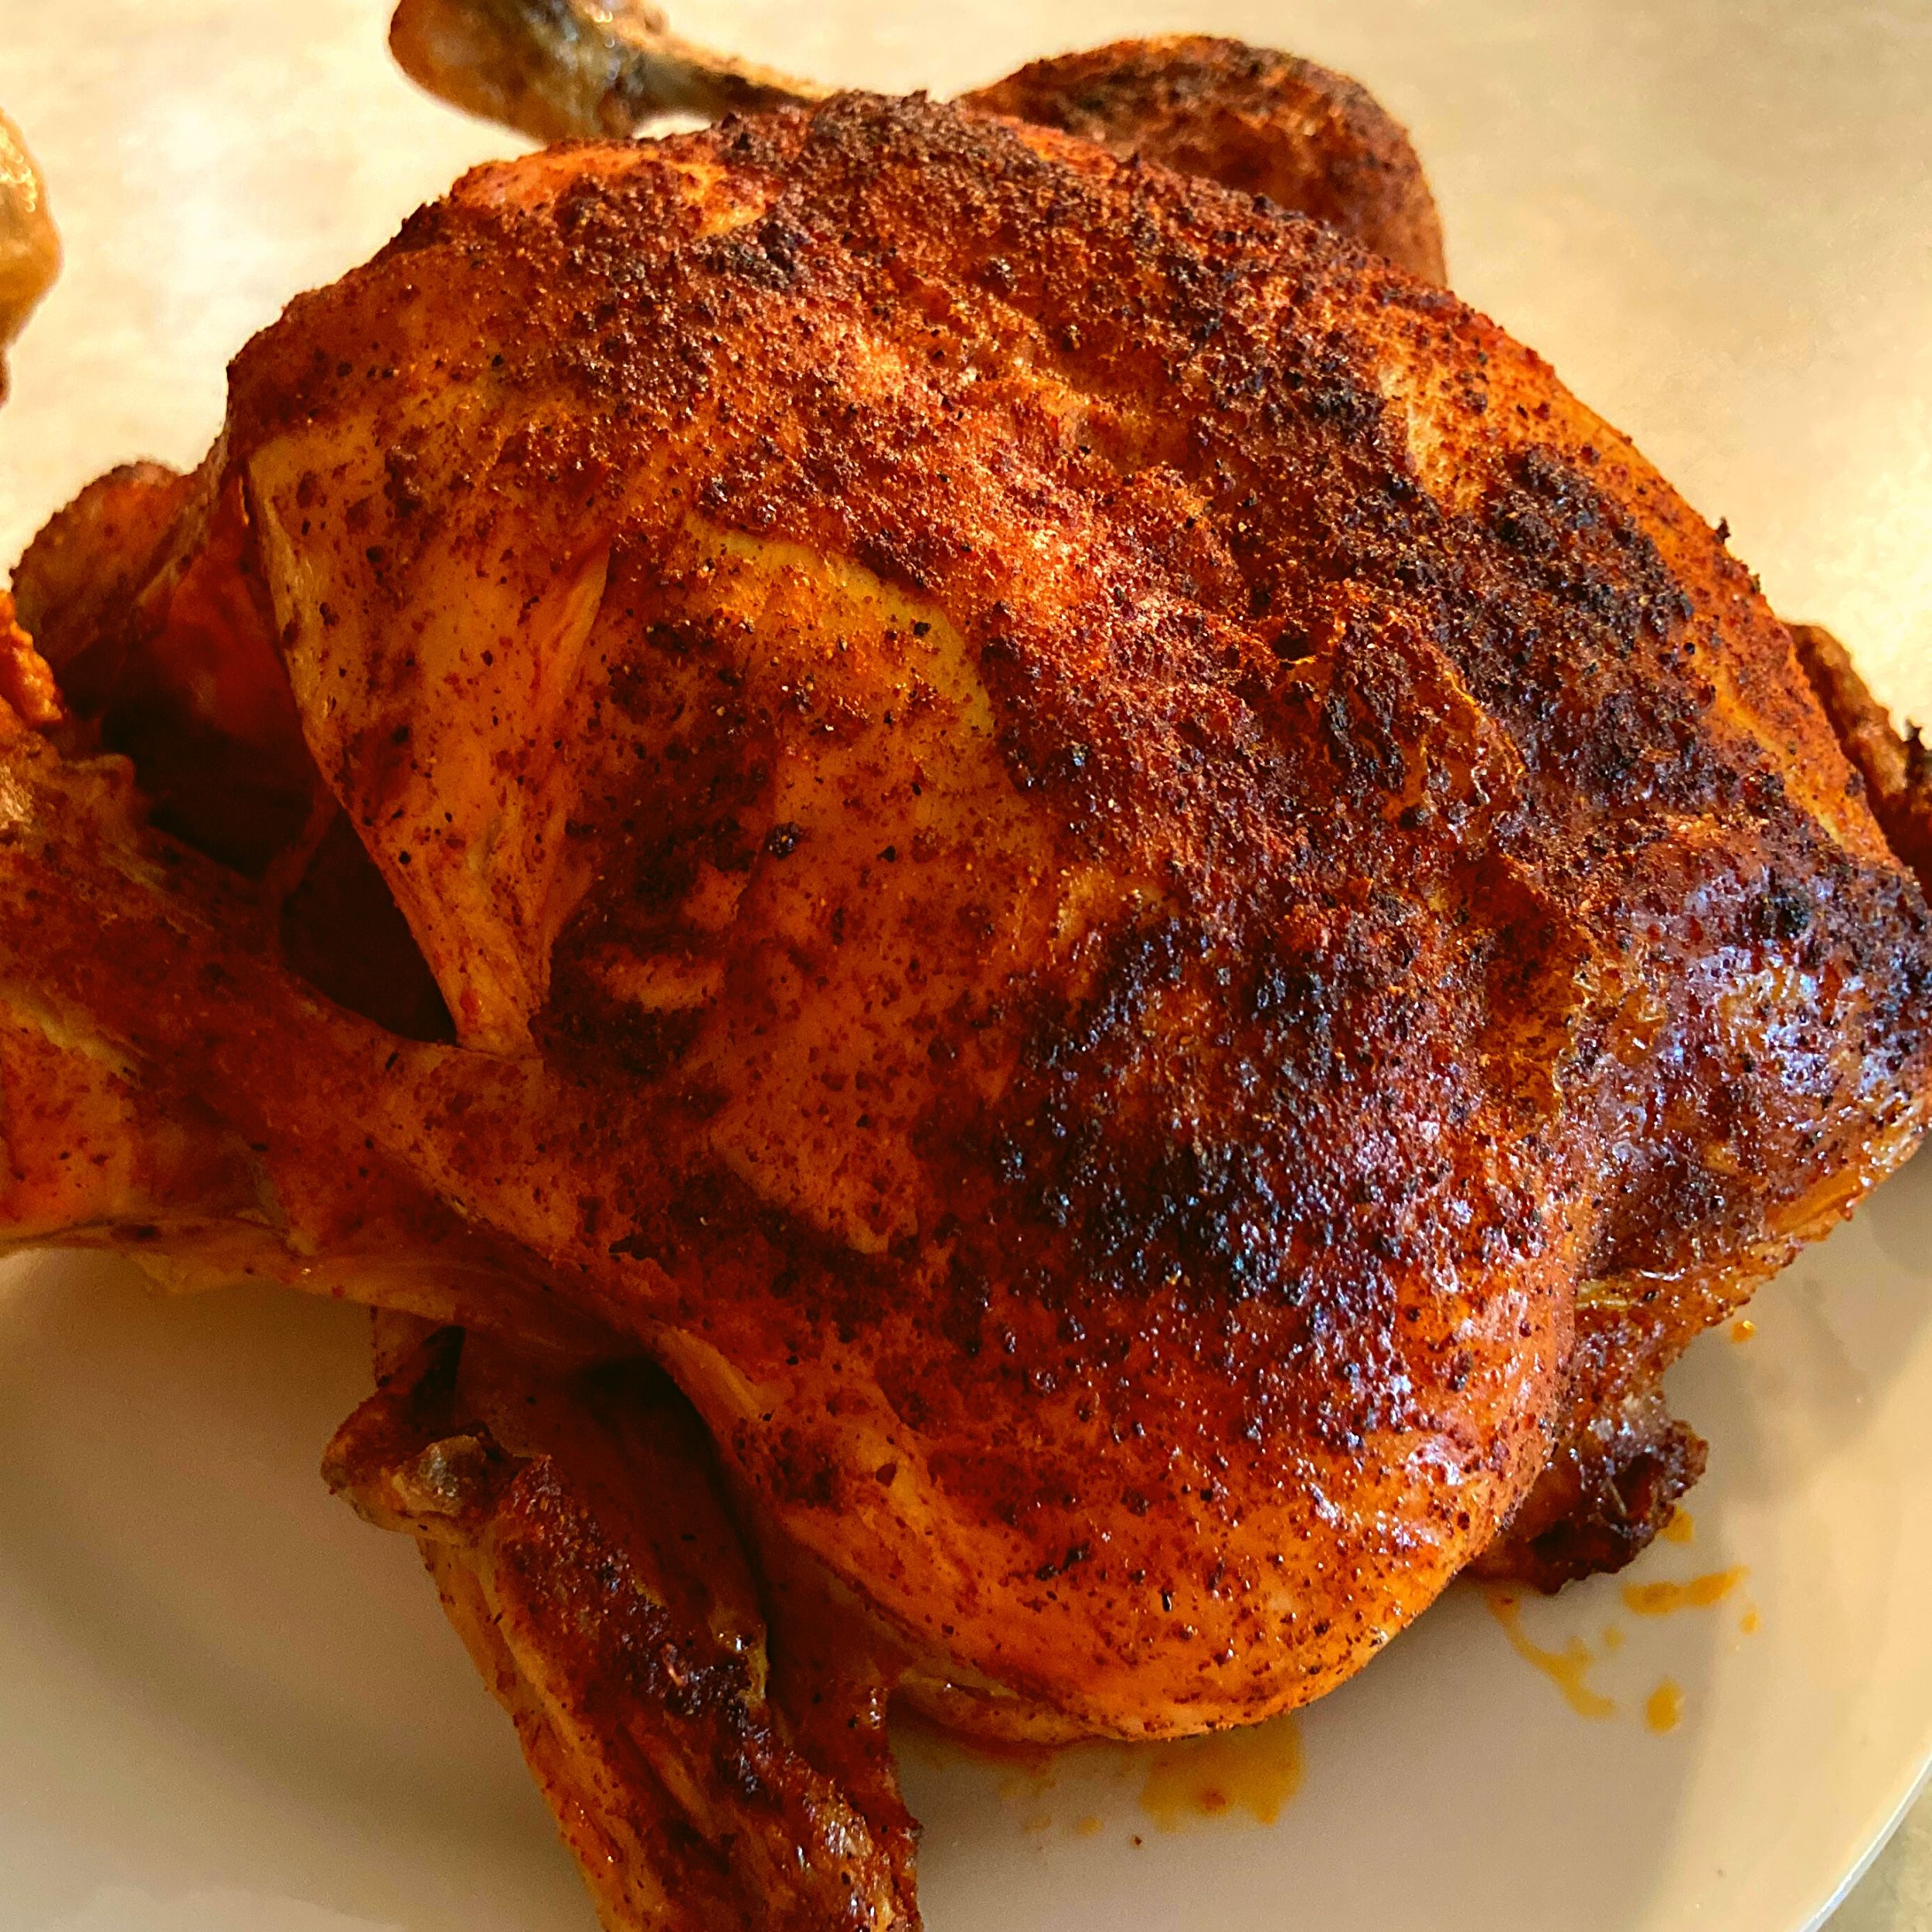 Instant Pot Whole Chicken Recipe - Rotisserie Style Chicken In Minutes -  Make Your Meals